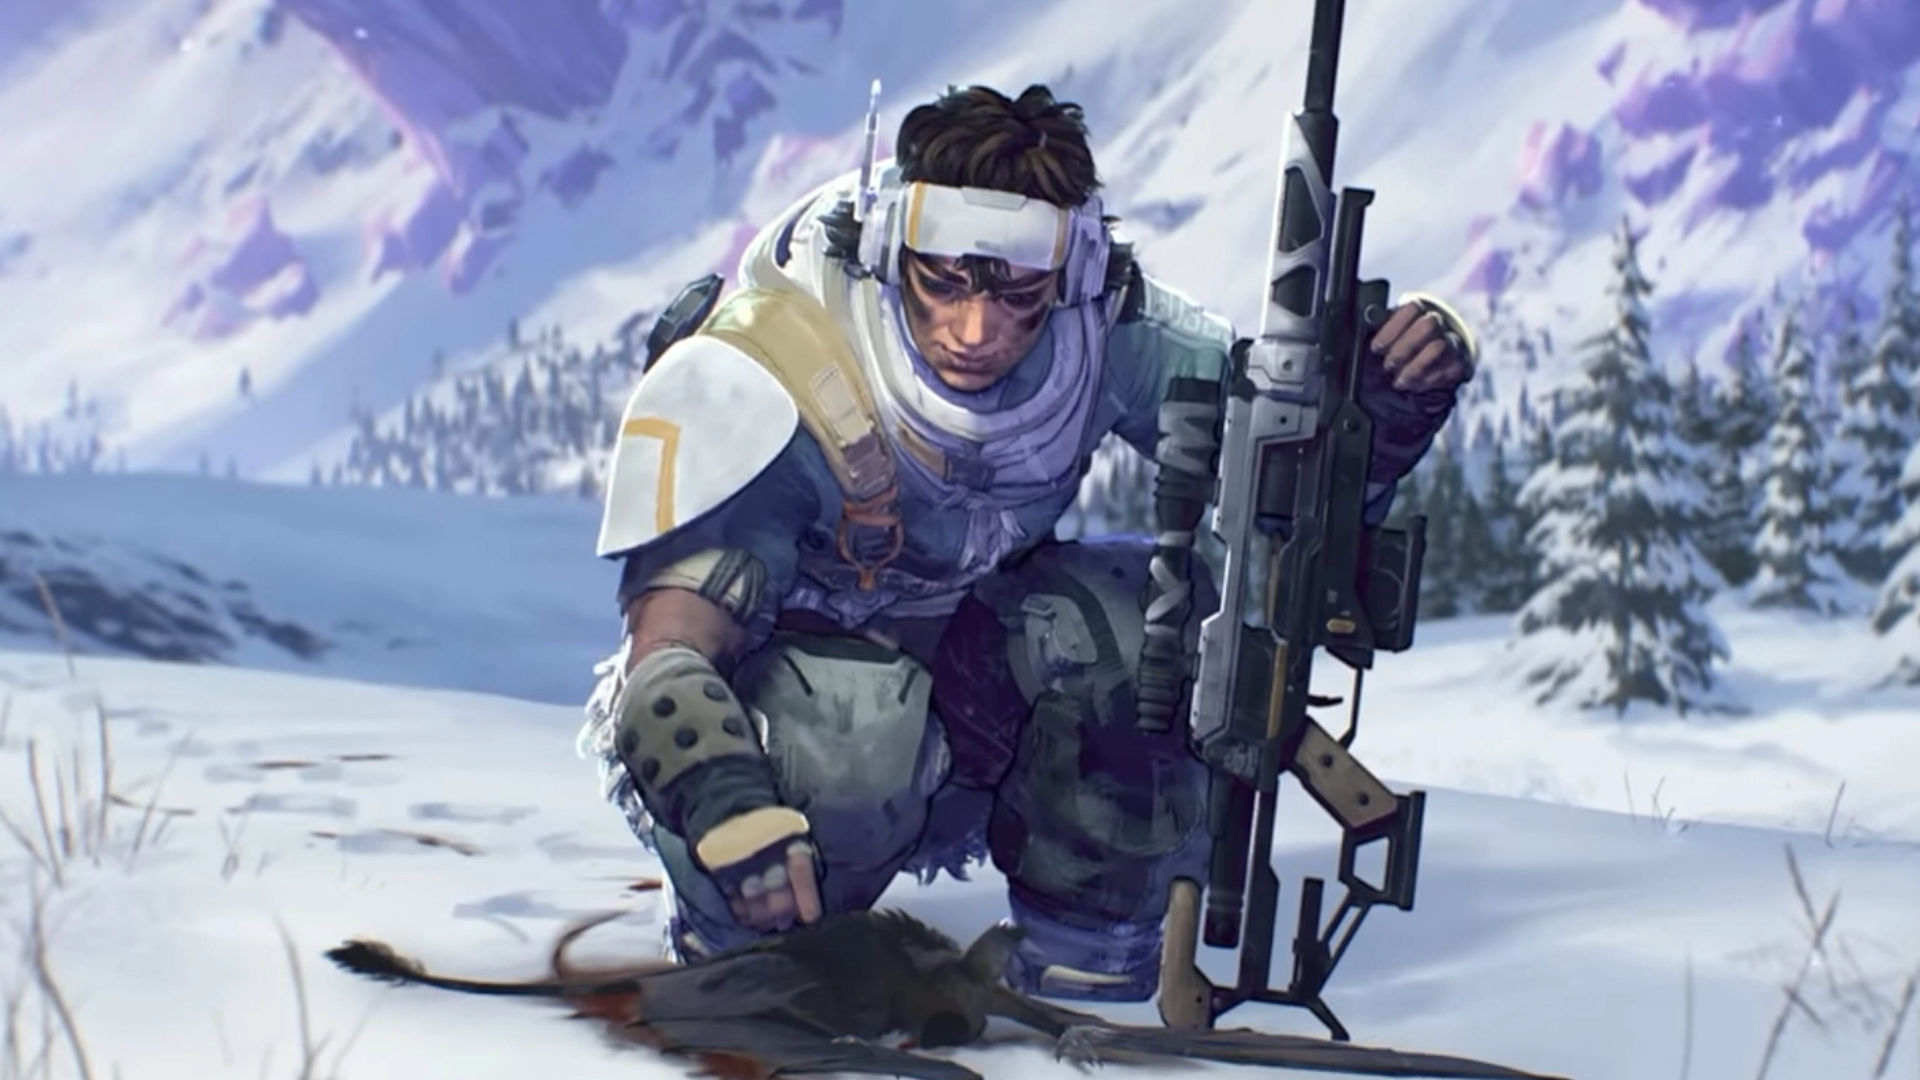 Apex Legend character Vantage surveying a trapped animal while surviving in the snowy wilds